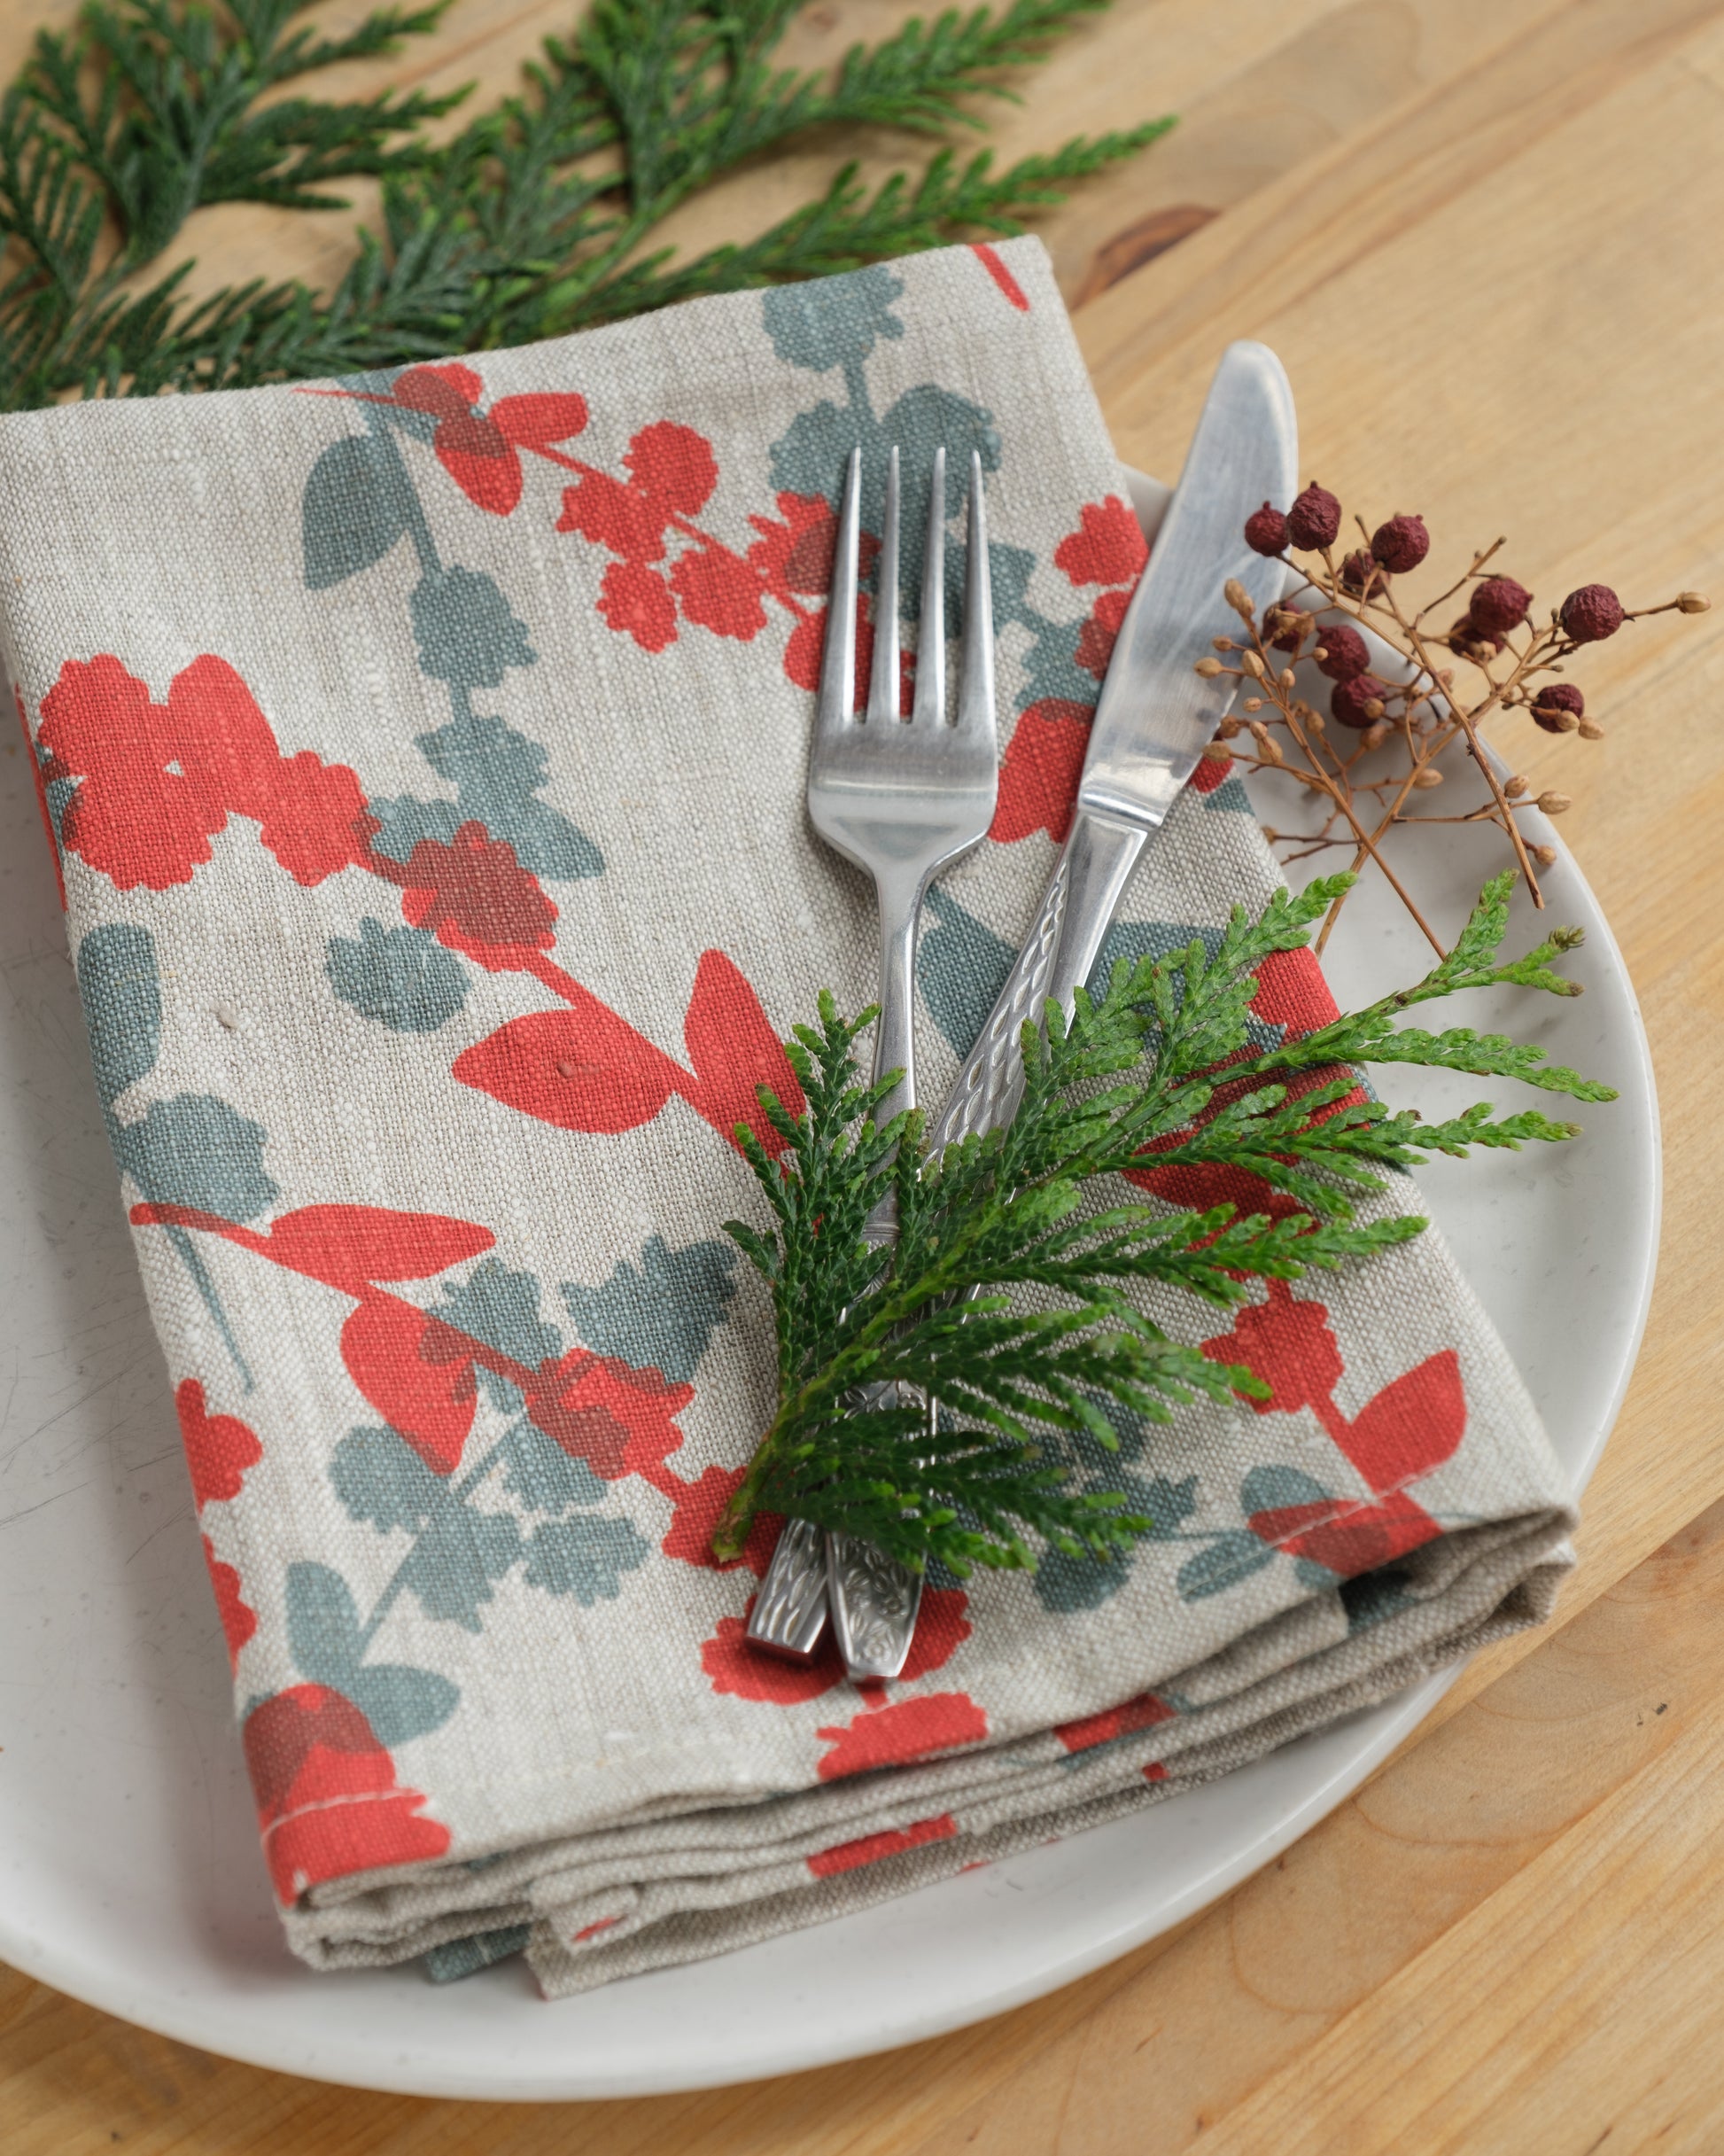 Linen napkins screen printed with Wattle Sprigs in Guava and Storm. Designed and screen printed by Femke Textiles.